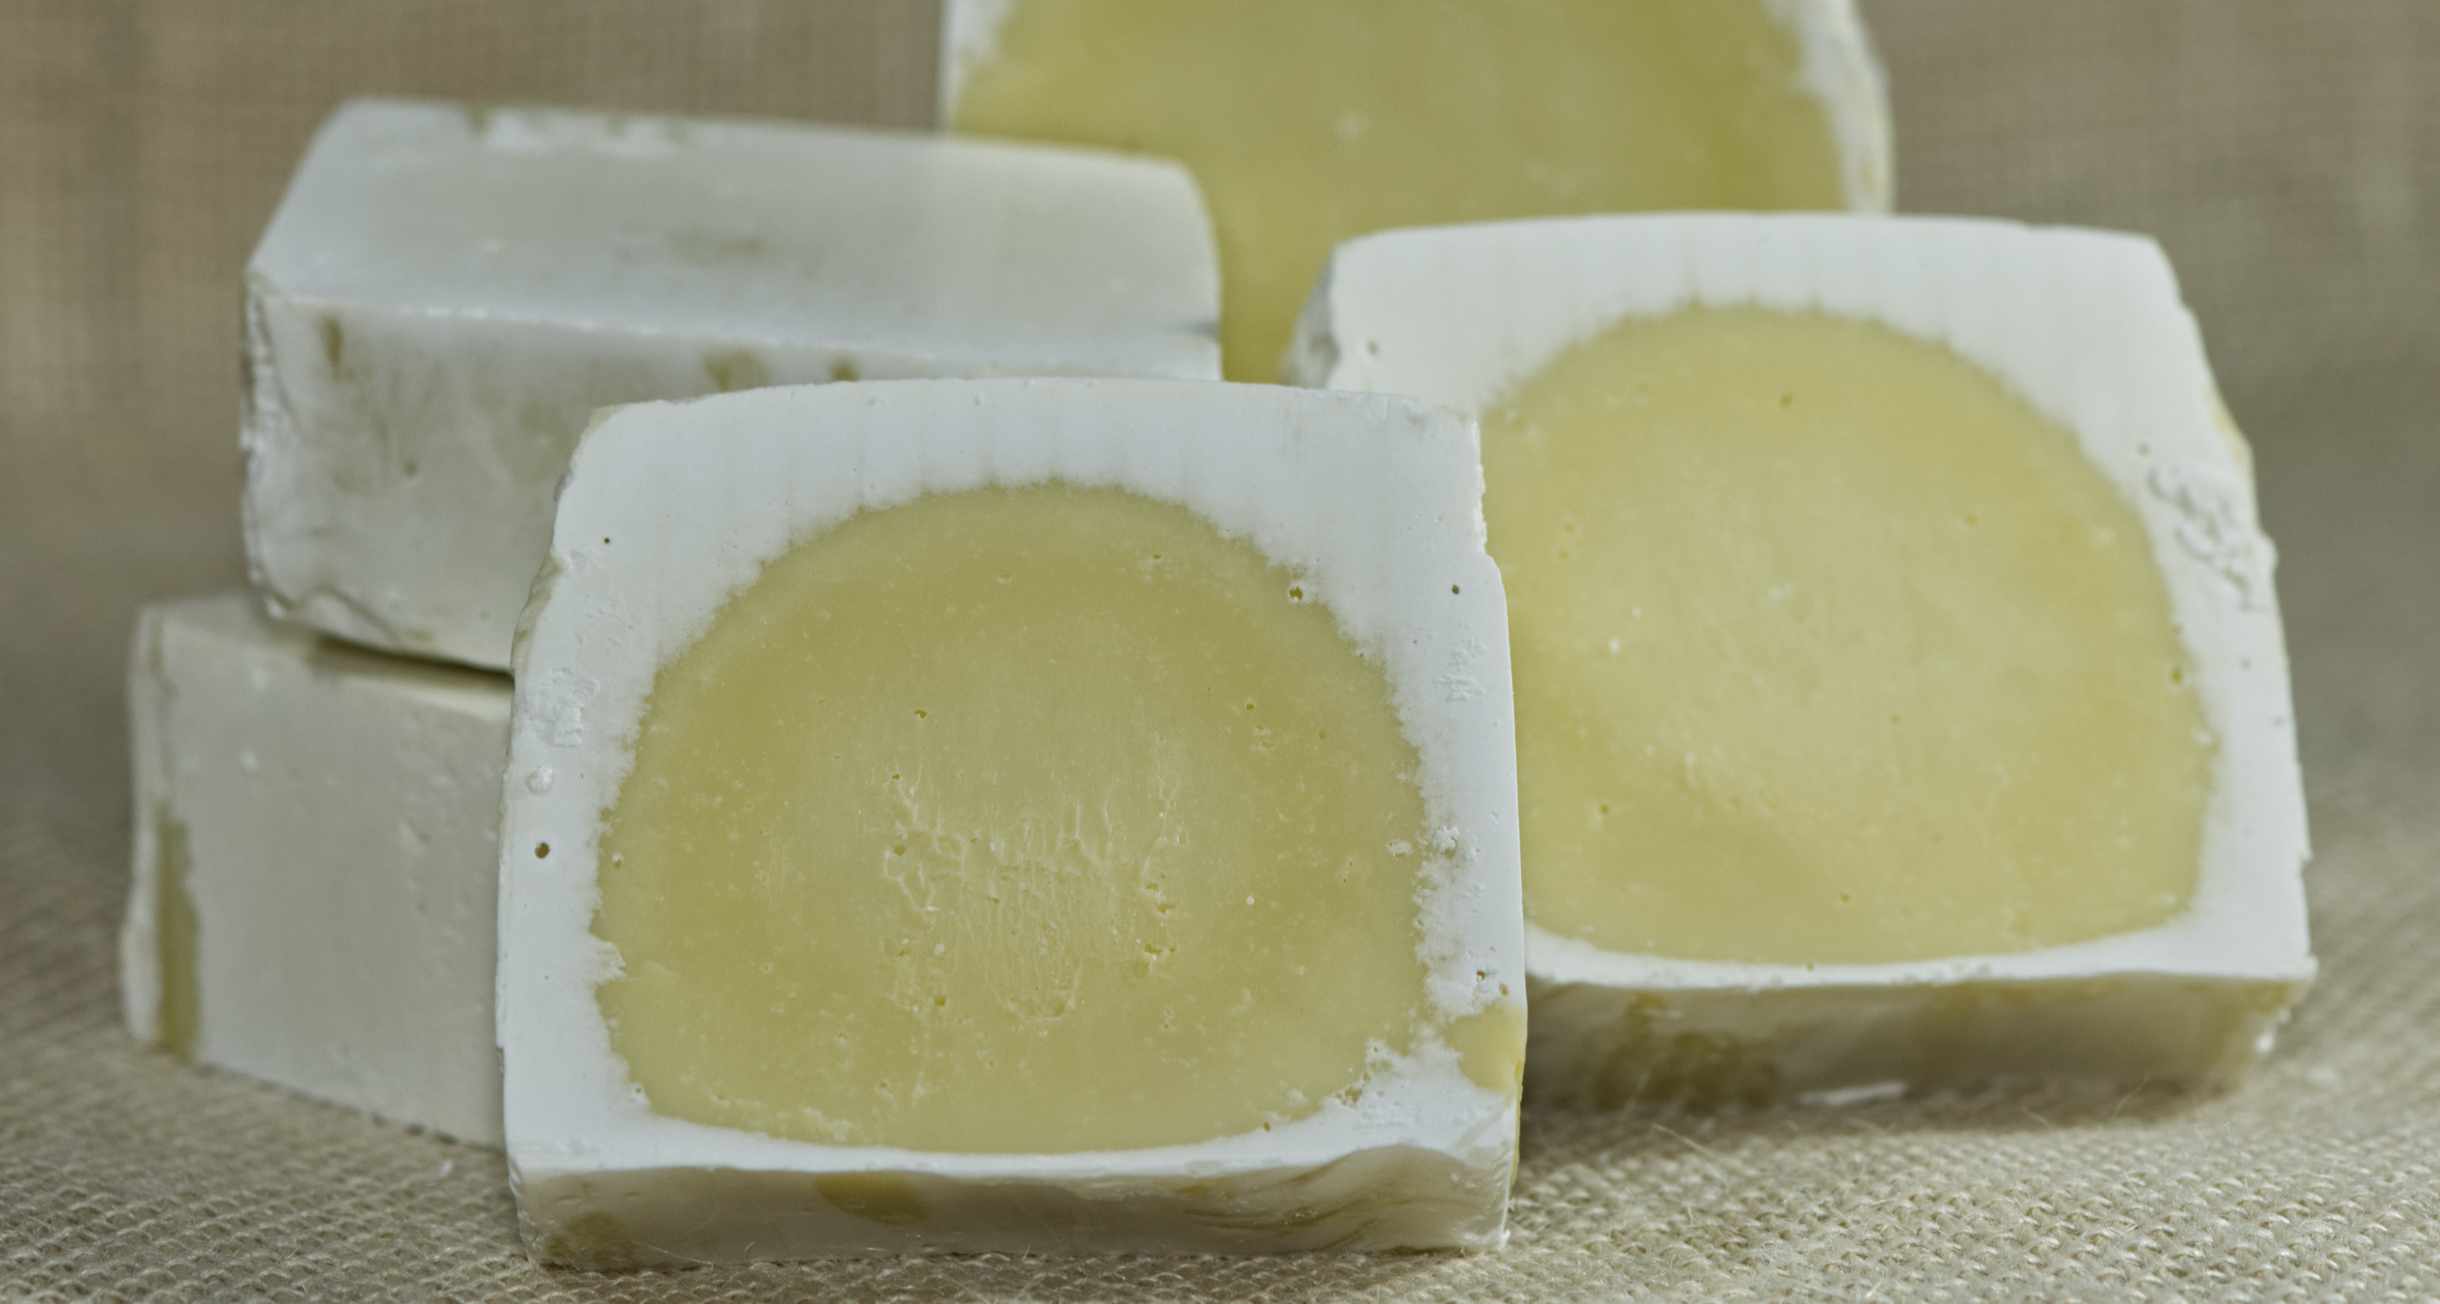 Soda Ash: The Rustic Patina of Handcrafted Soap